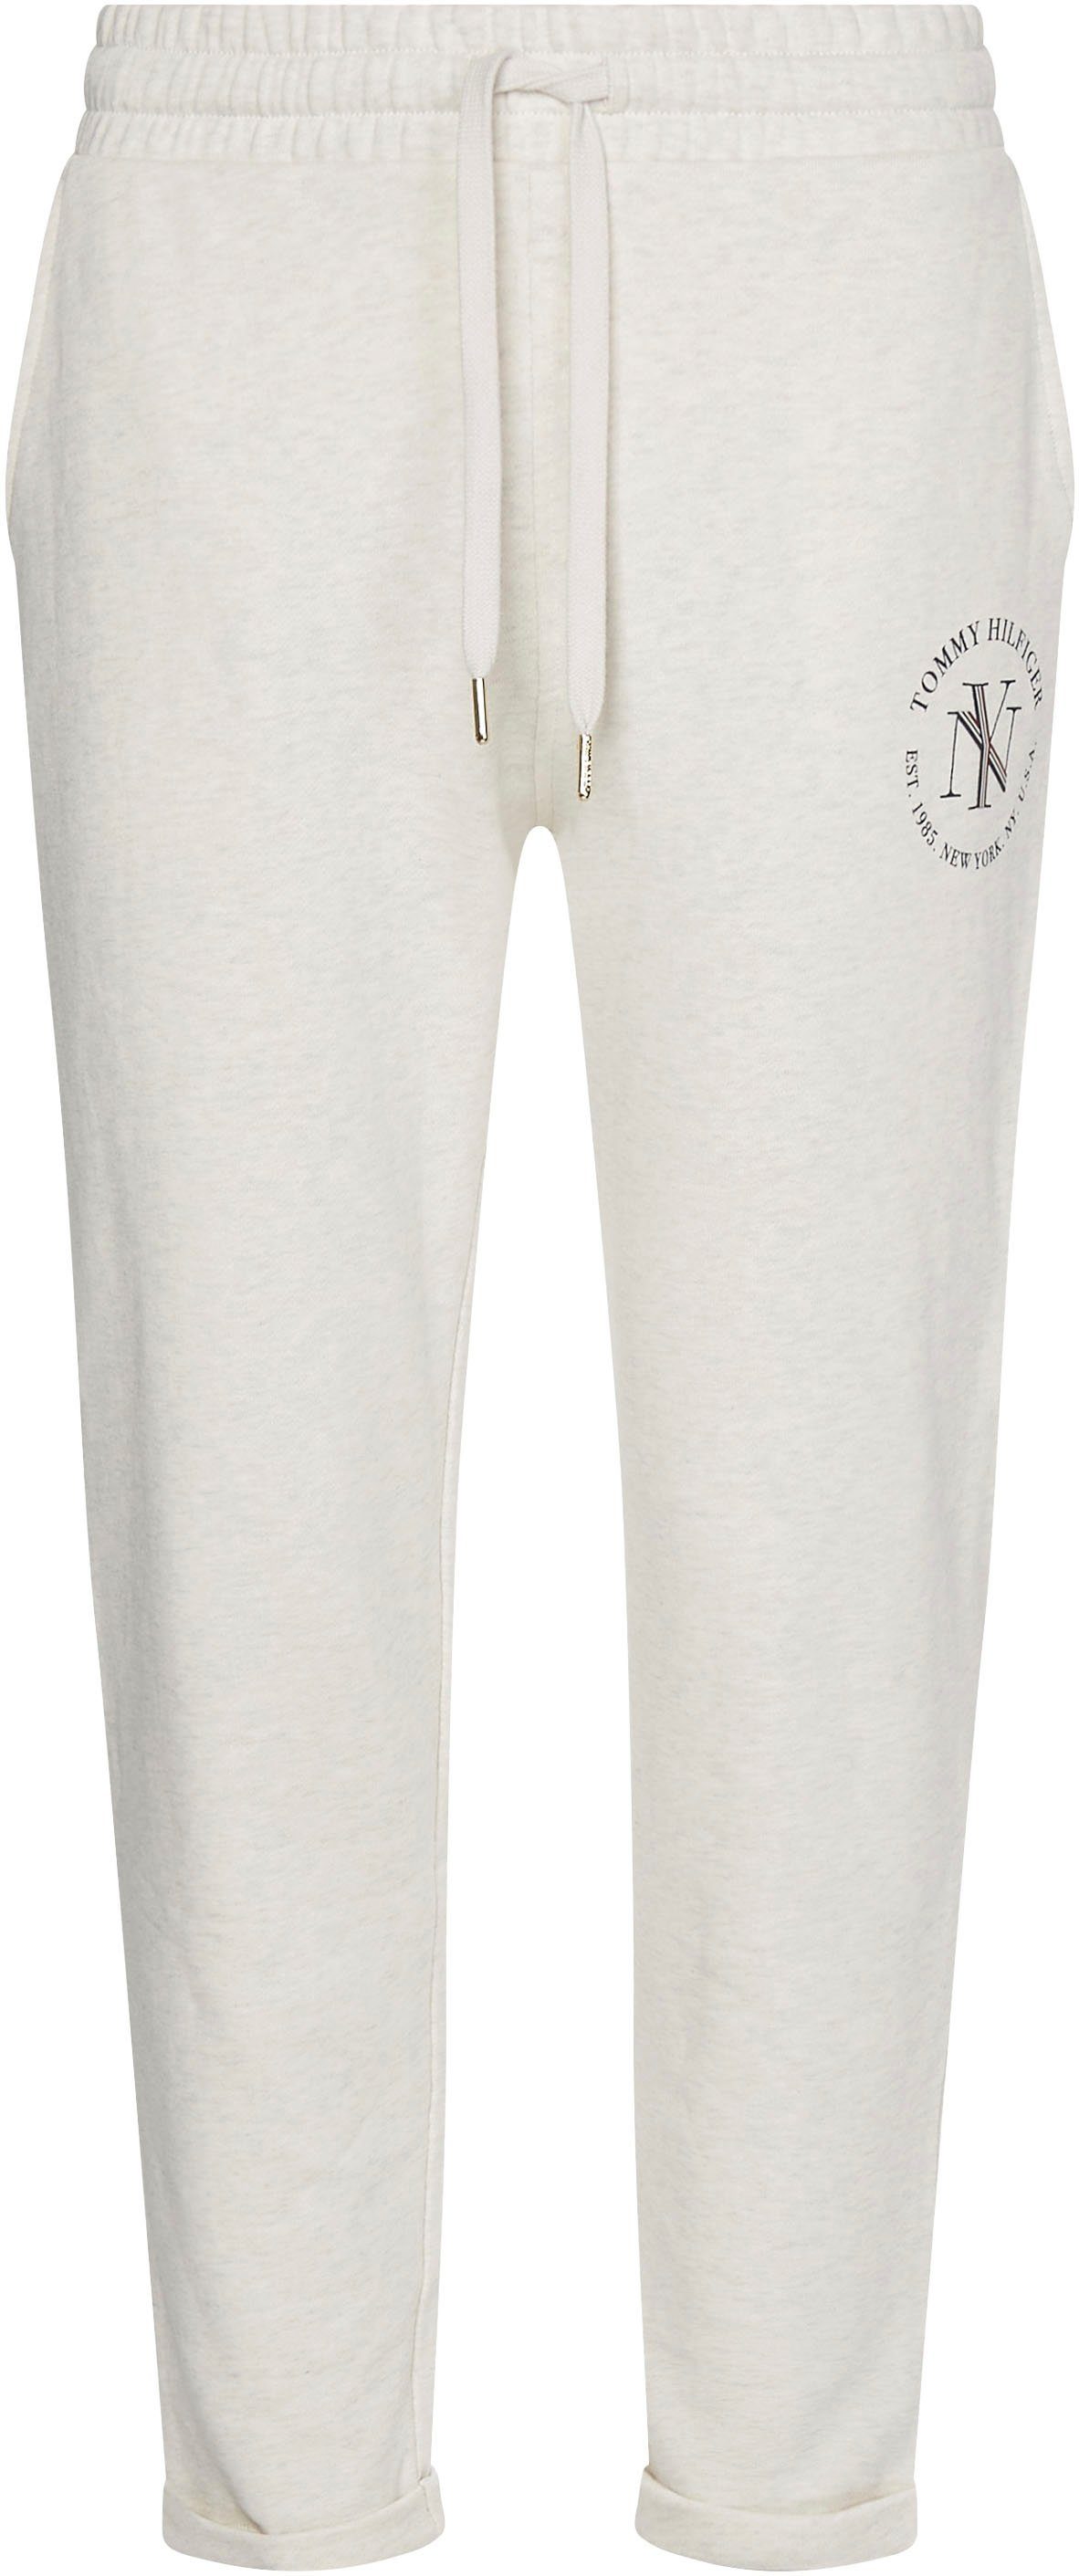 Hilfiger Hilfiger Markenlabel NYC ROUNDALL TAPERED Sweatpants Tommy White-Heather SWEATPANTS mit Tommy